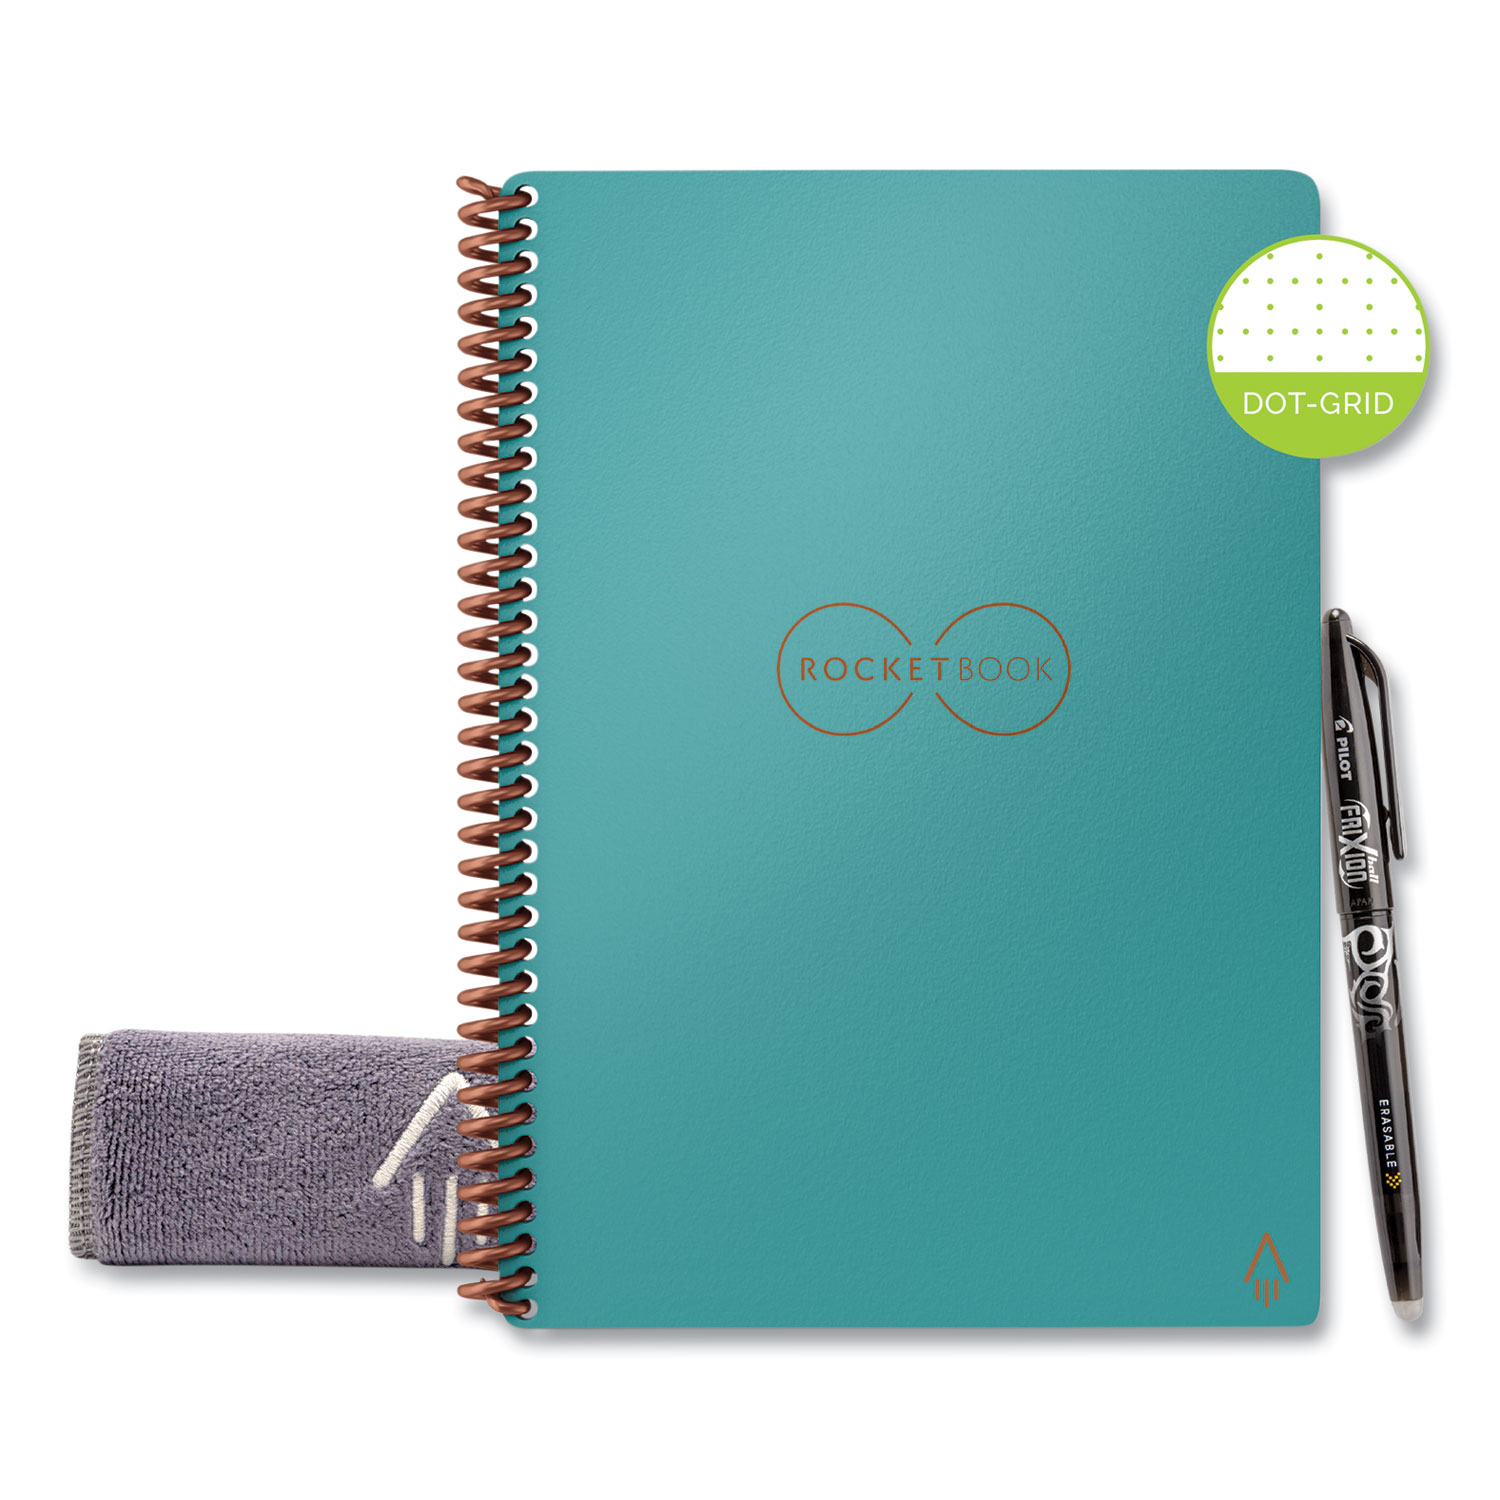  Rocketbook EVR-E-R-CCE Rocketbook Everlast Smart Reusable Notebook, Dotted Rule, Neptune Teal Cover, 6 x 8.8, 18 Sheets (RKB24328139) 